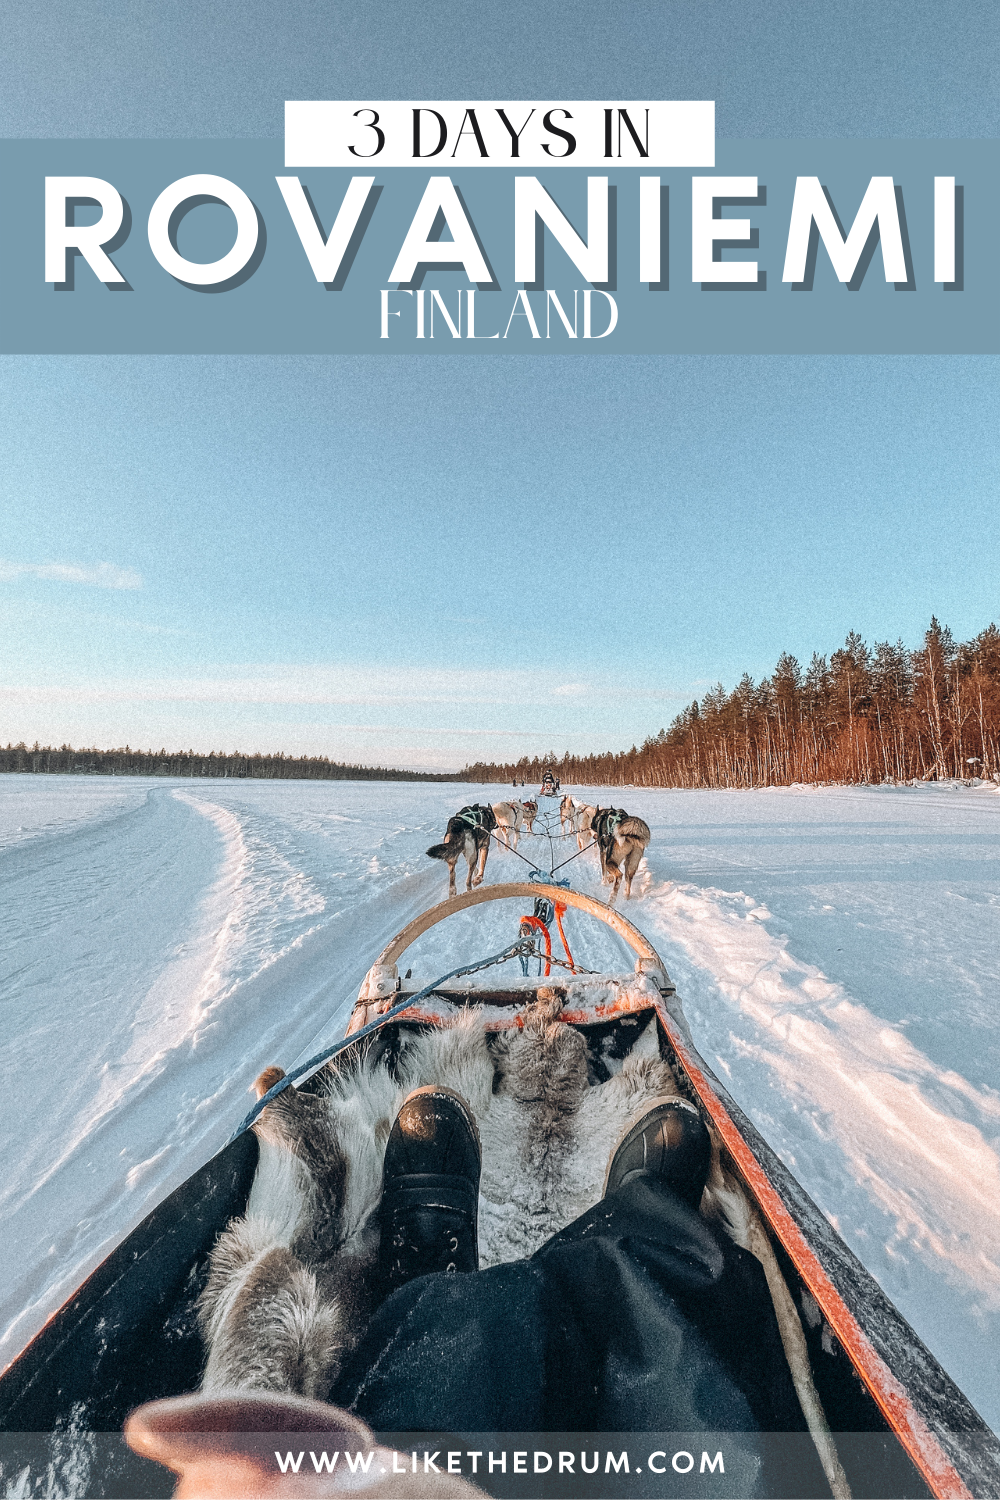 WHAT TO DO IN ROVANIEMI, FINLAND